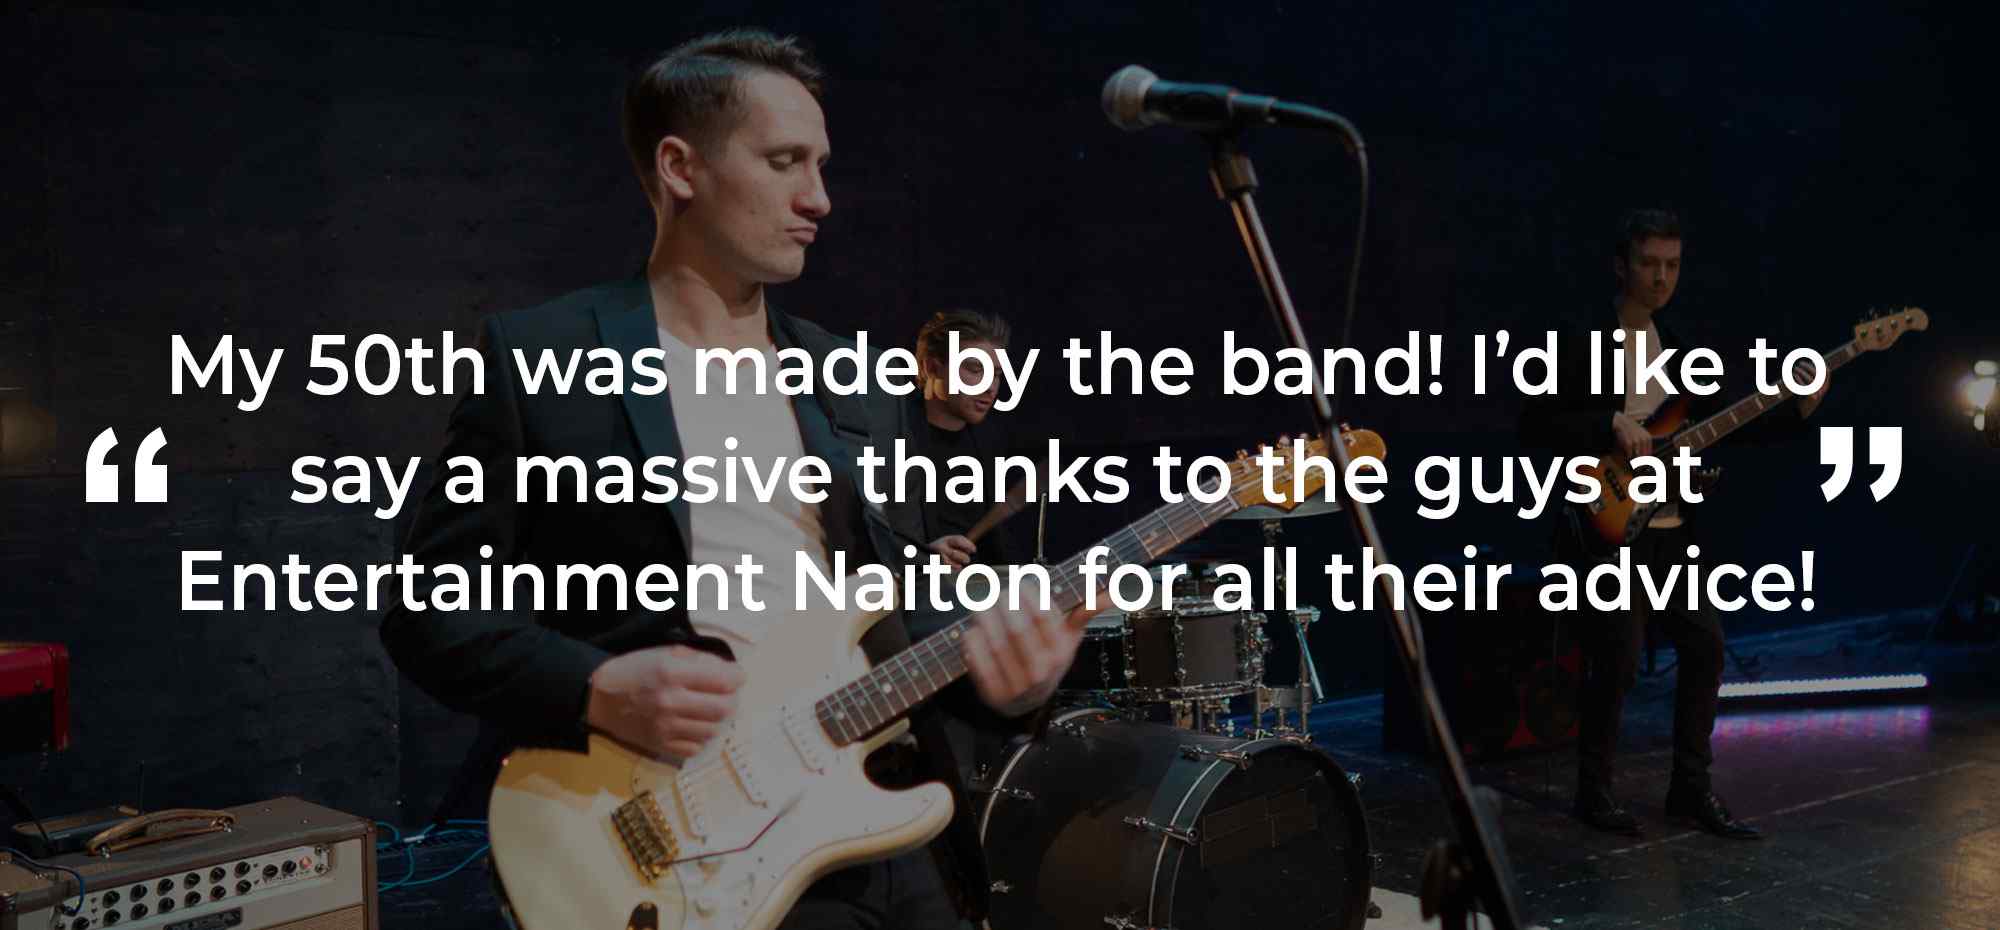 Client Review of a Party Band Hampshire